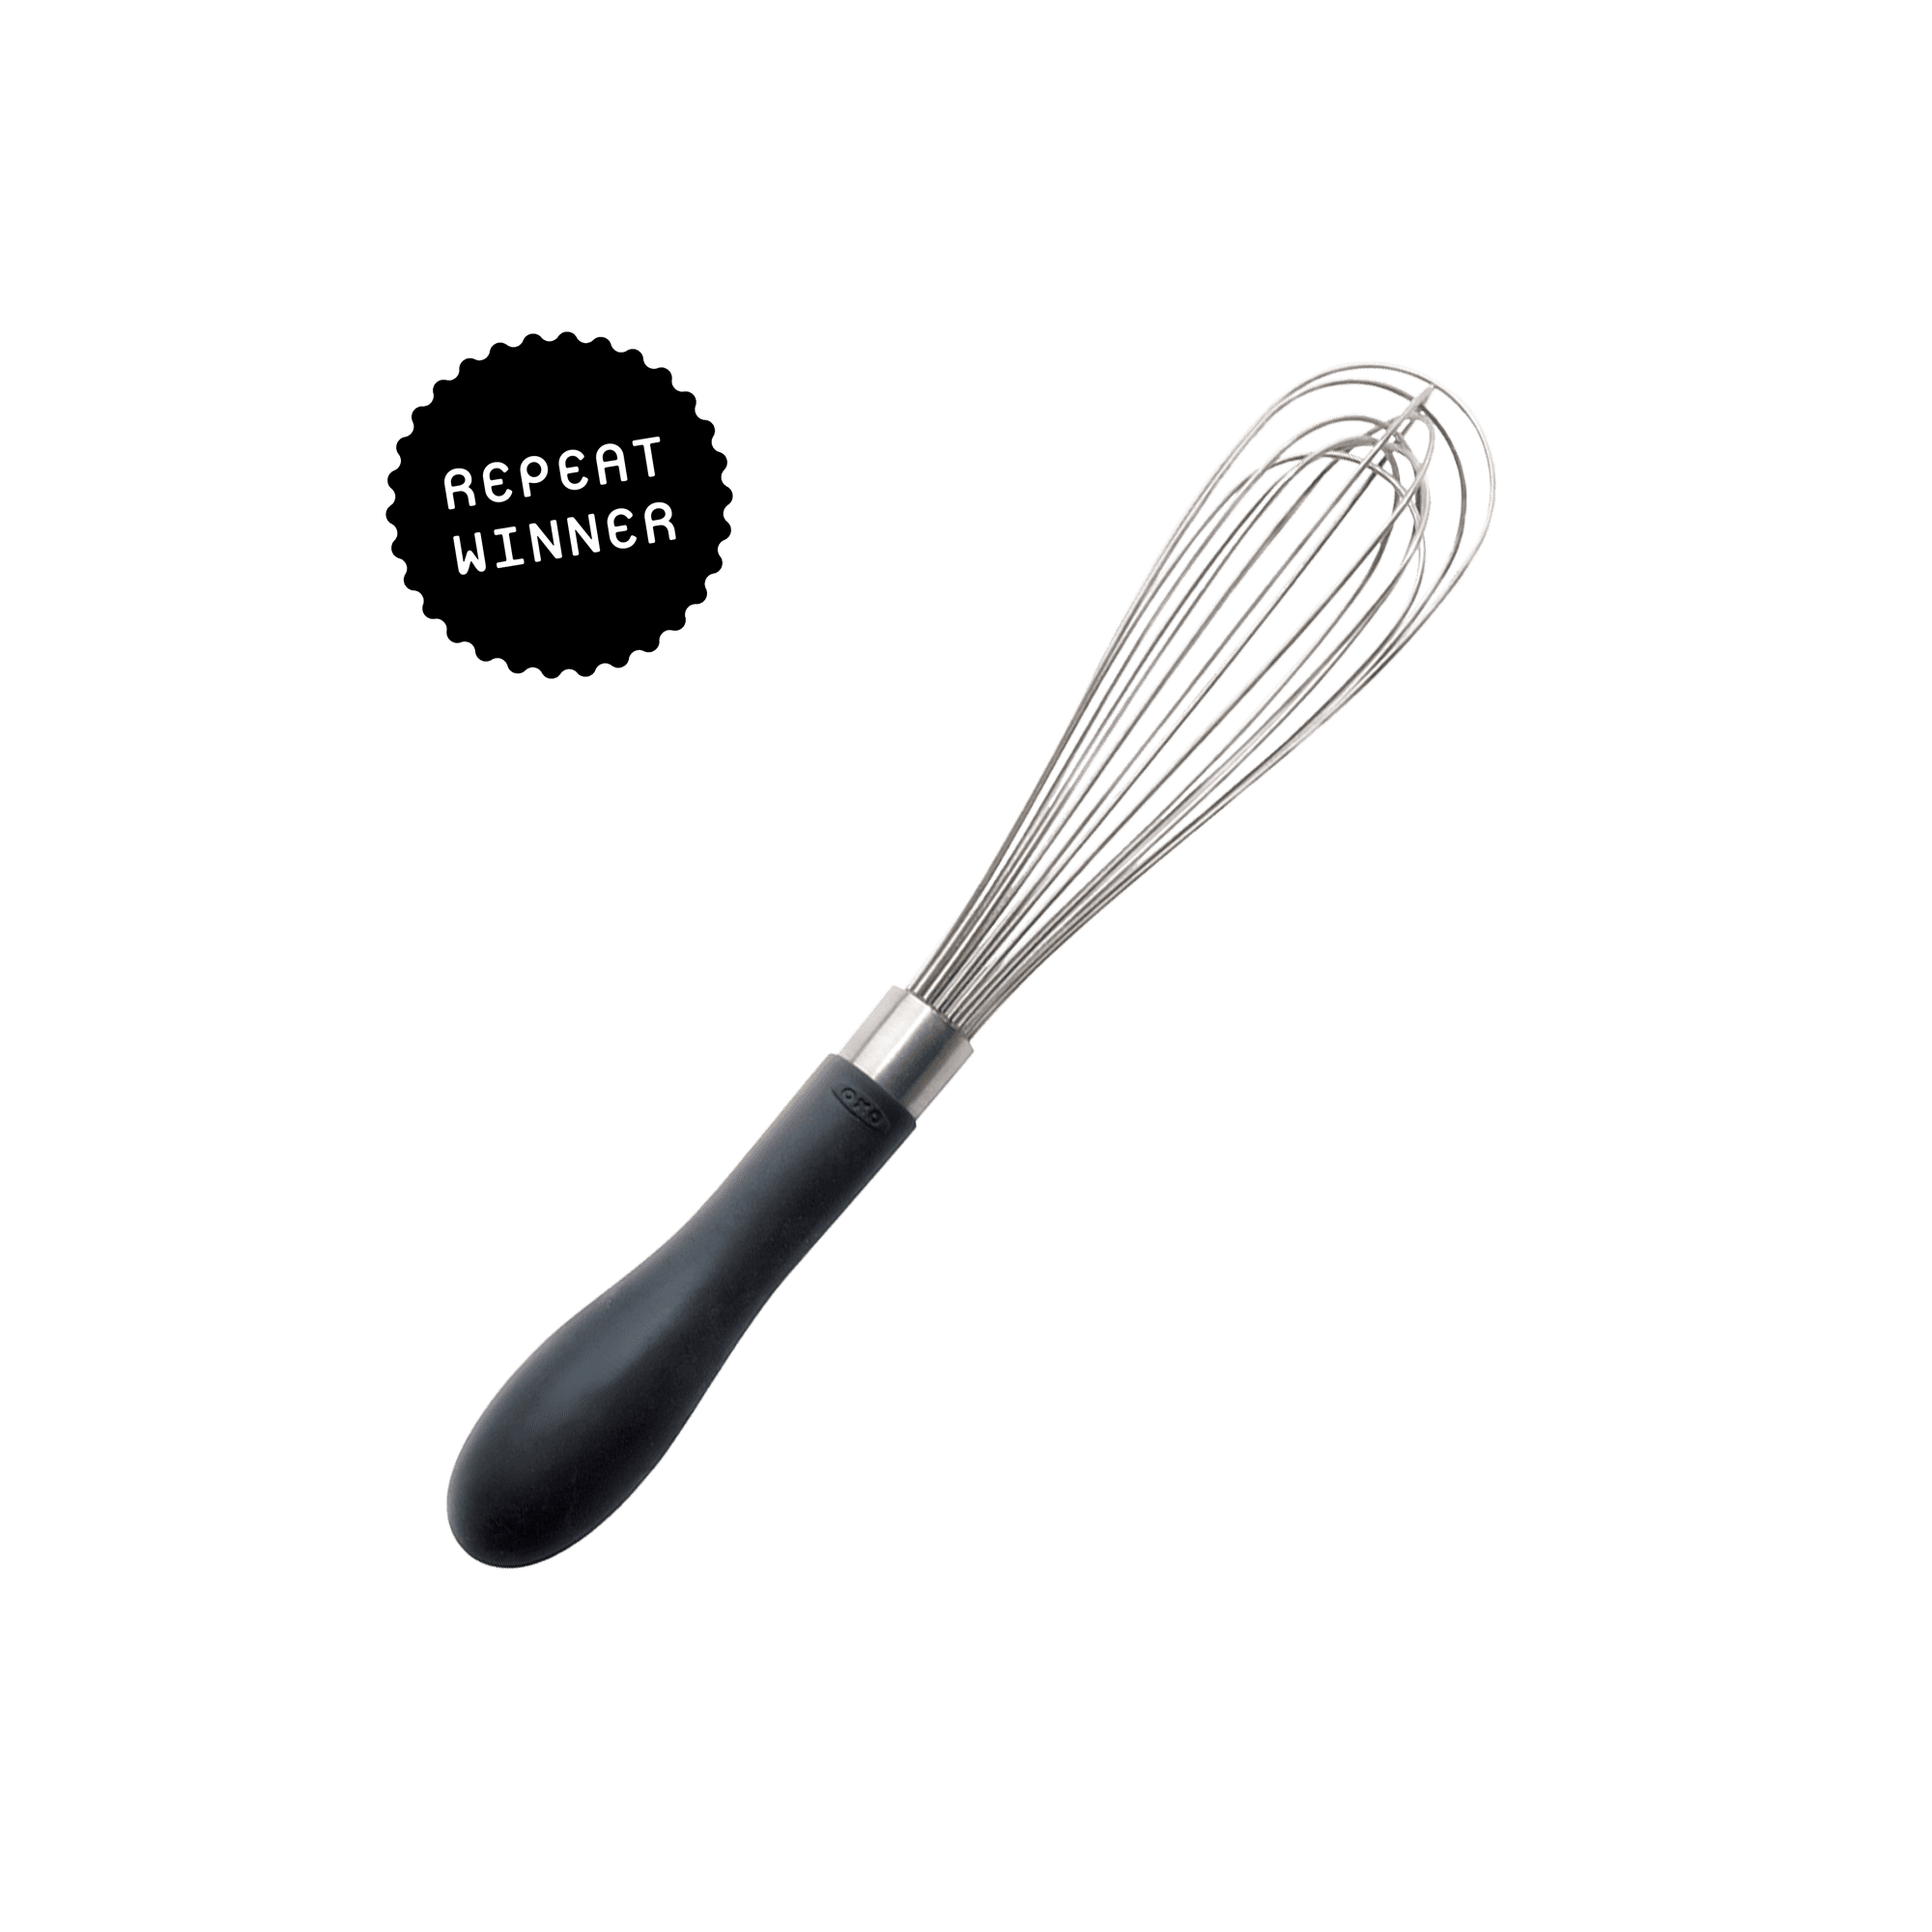  OXO Good Grips 9-Inch Whisk: Home & Kitchen